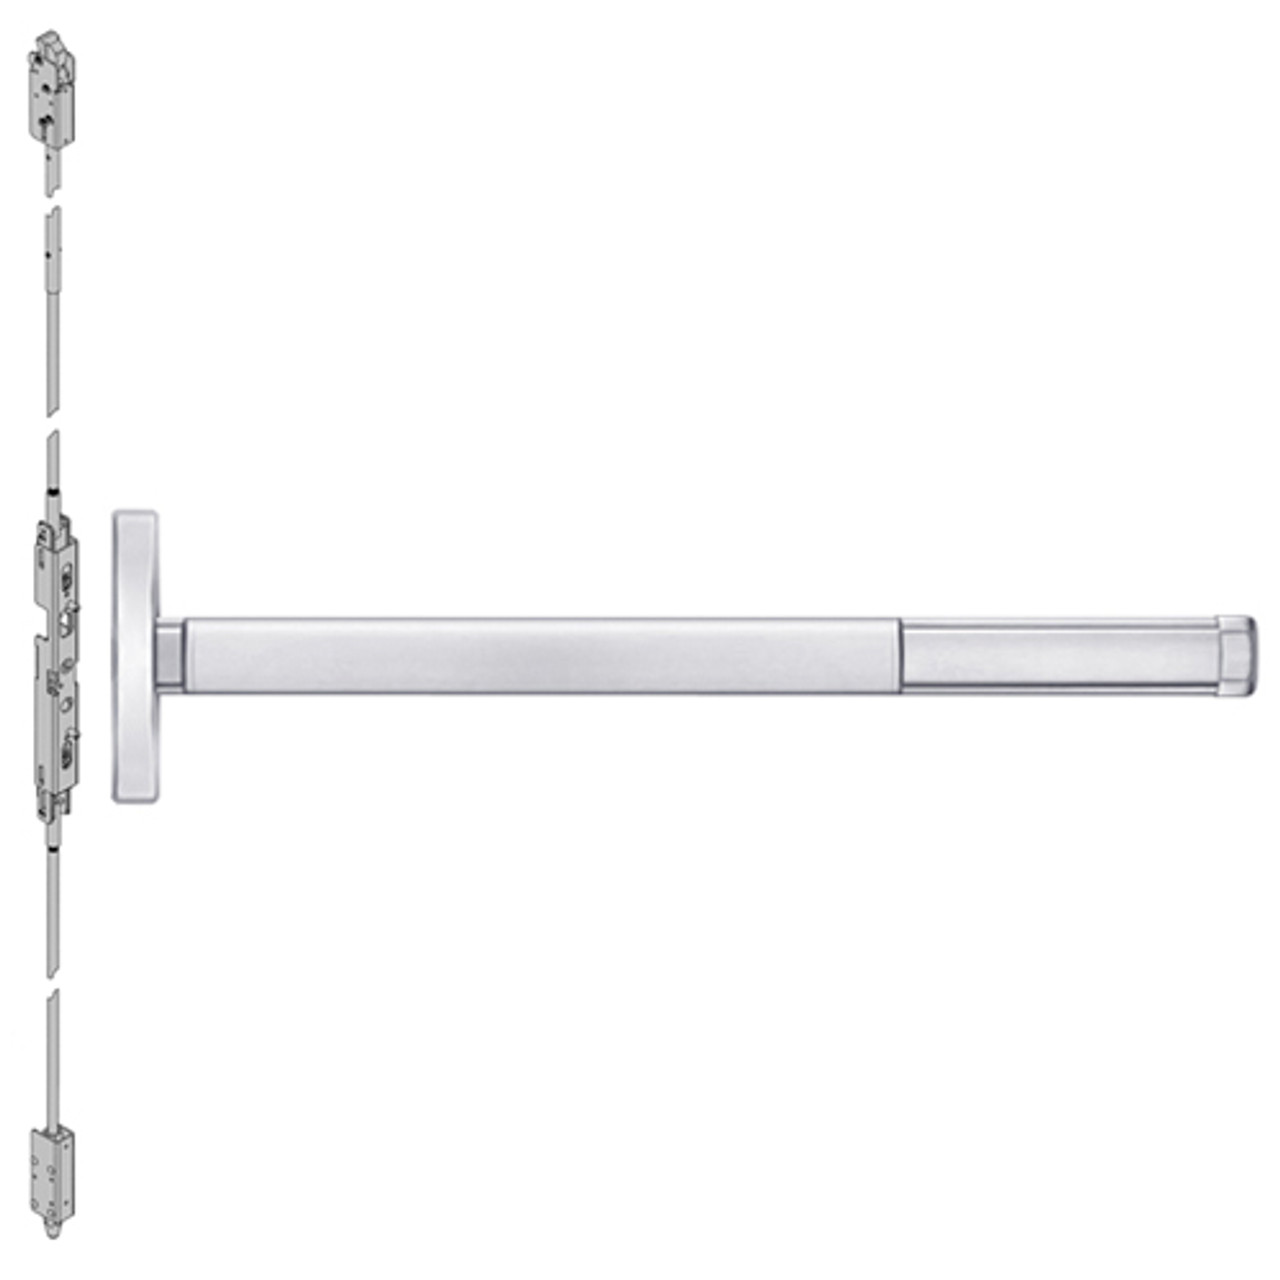 FL2603LBR-625-36 PHI 2600 Series Fire Rated Concealed Vertical Rod Exit Device Prepped for Key Retracts Latchbolt with Less Bottom Rod in Bright Chrome Finish